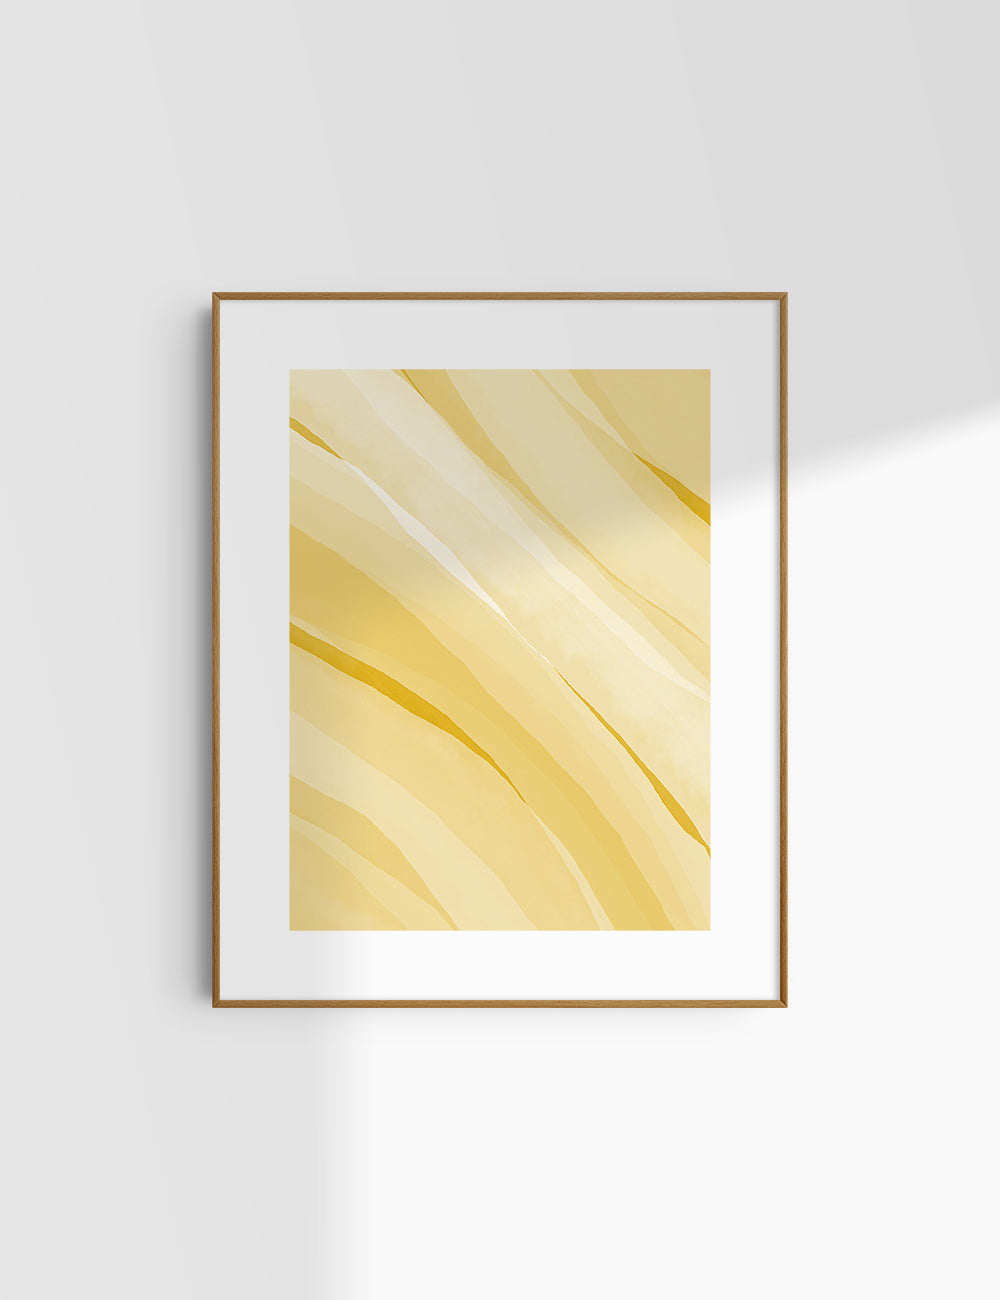 YELLOW WATERCOLOR ABSTRACT. Aesthetic. Minimalist. Abstract Watercolor Painting. Printable Wall Art. - PAPER MOON Art & Design